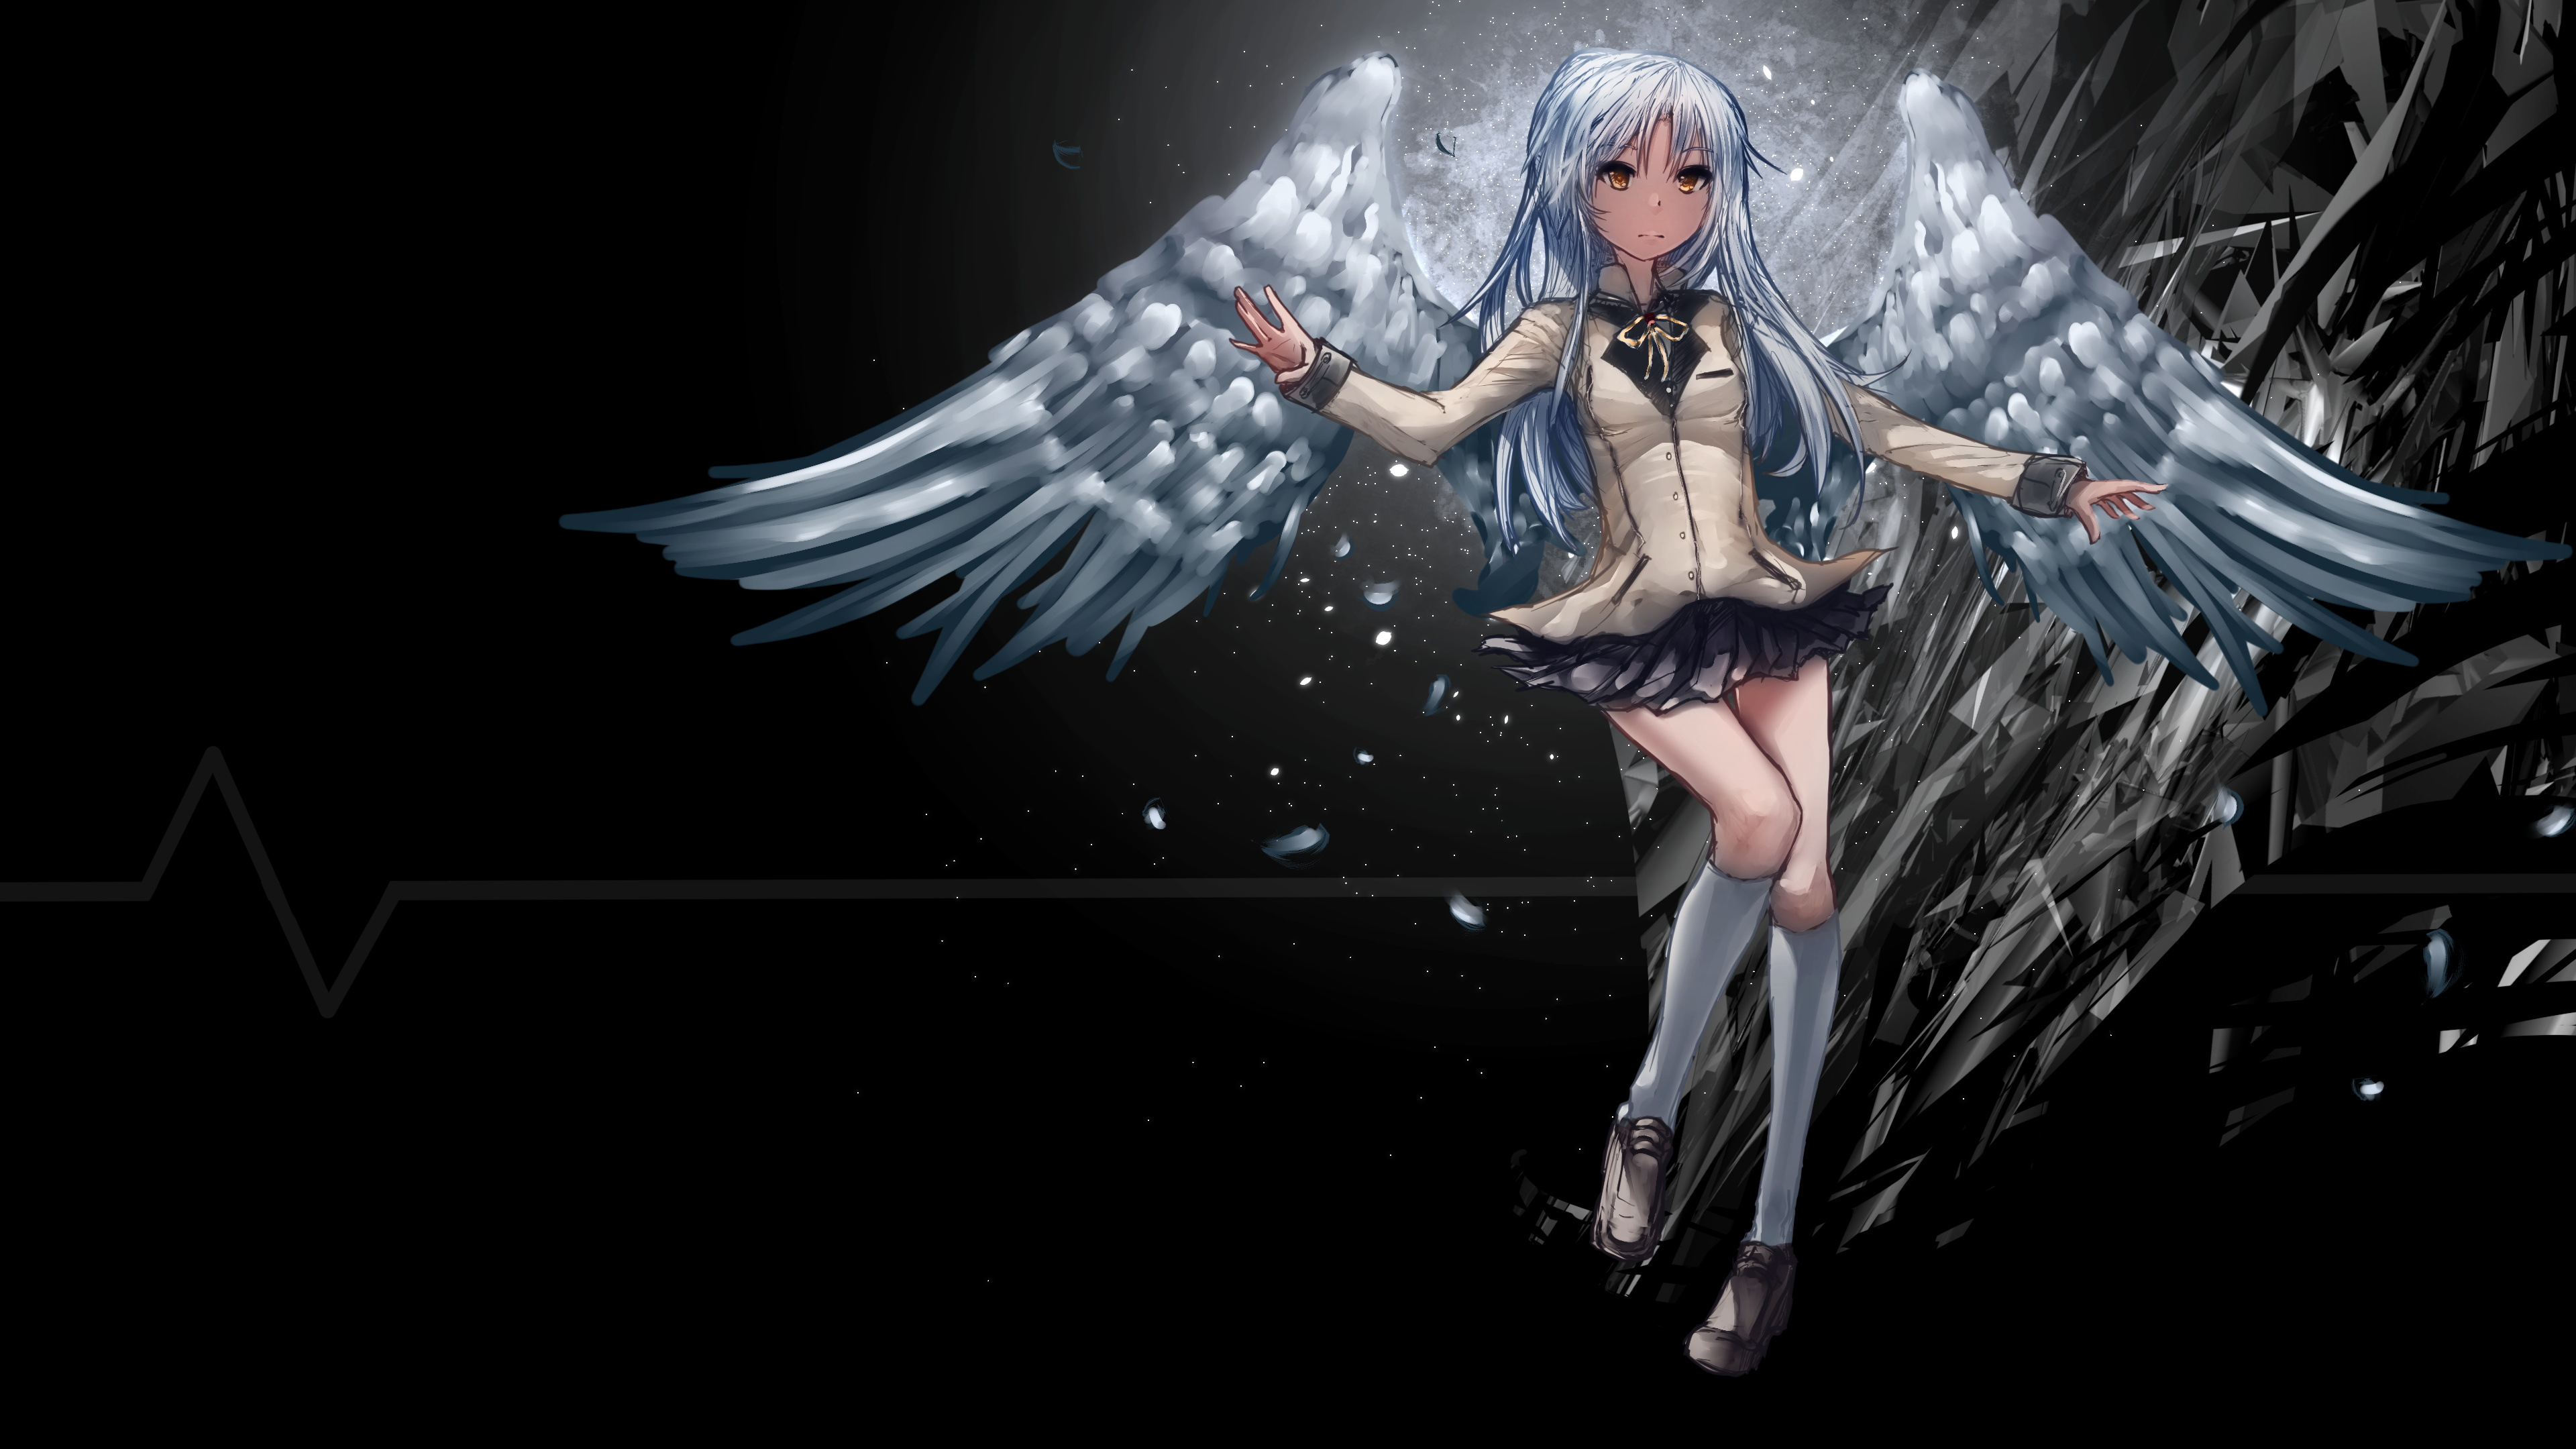 Angel Beats! (Anime): Kanade Tachibana, Angel by the Afterlife Battle Front. 3840x2160 4K Background.